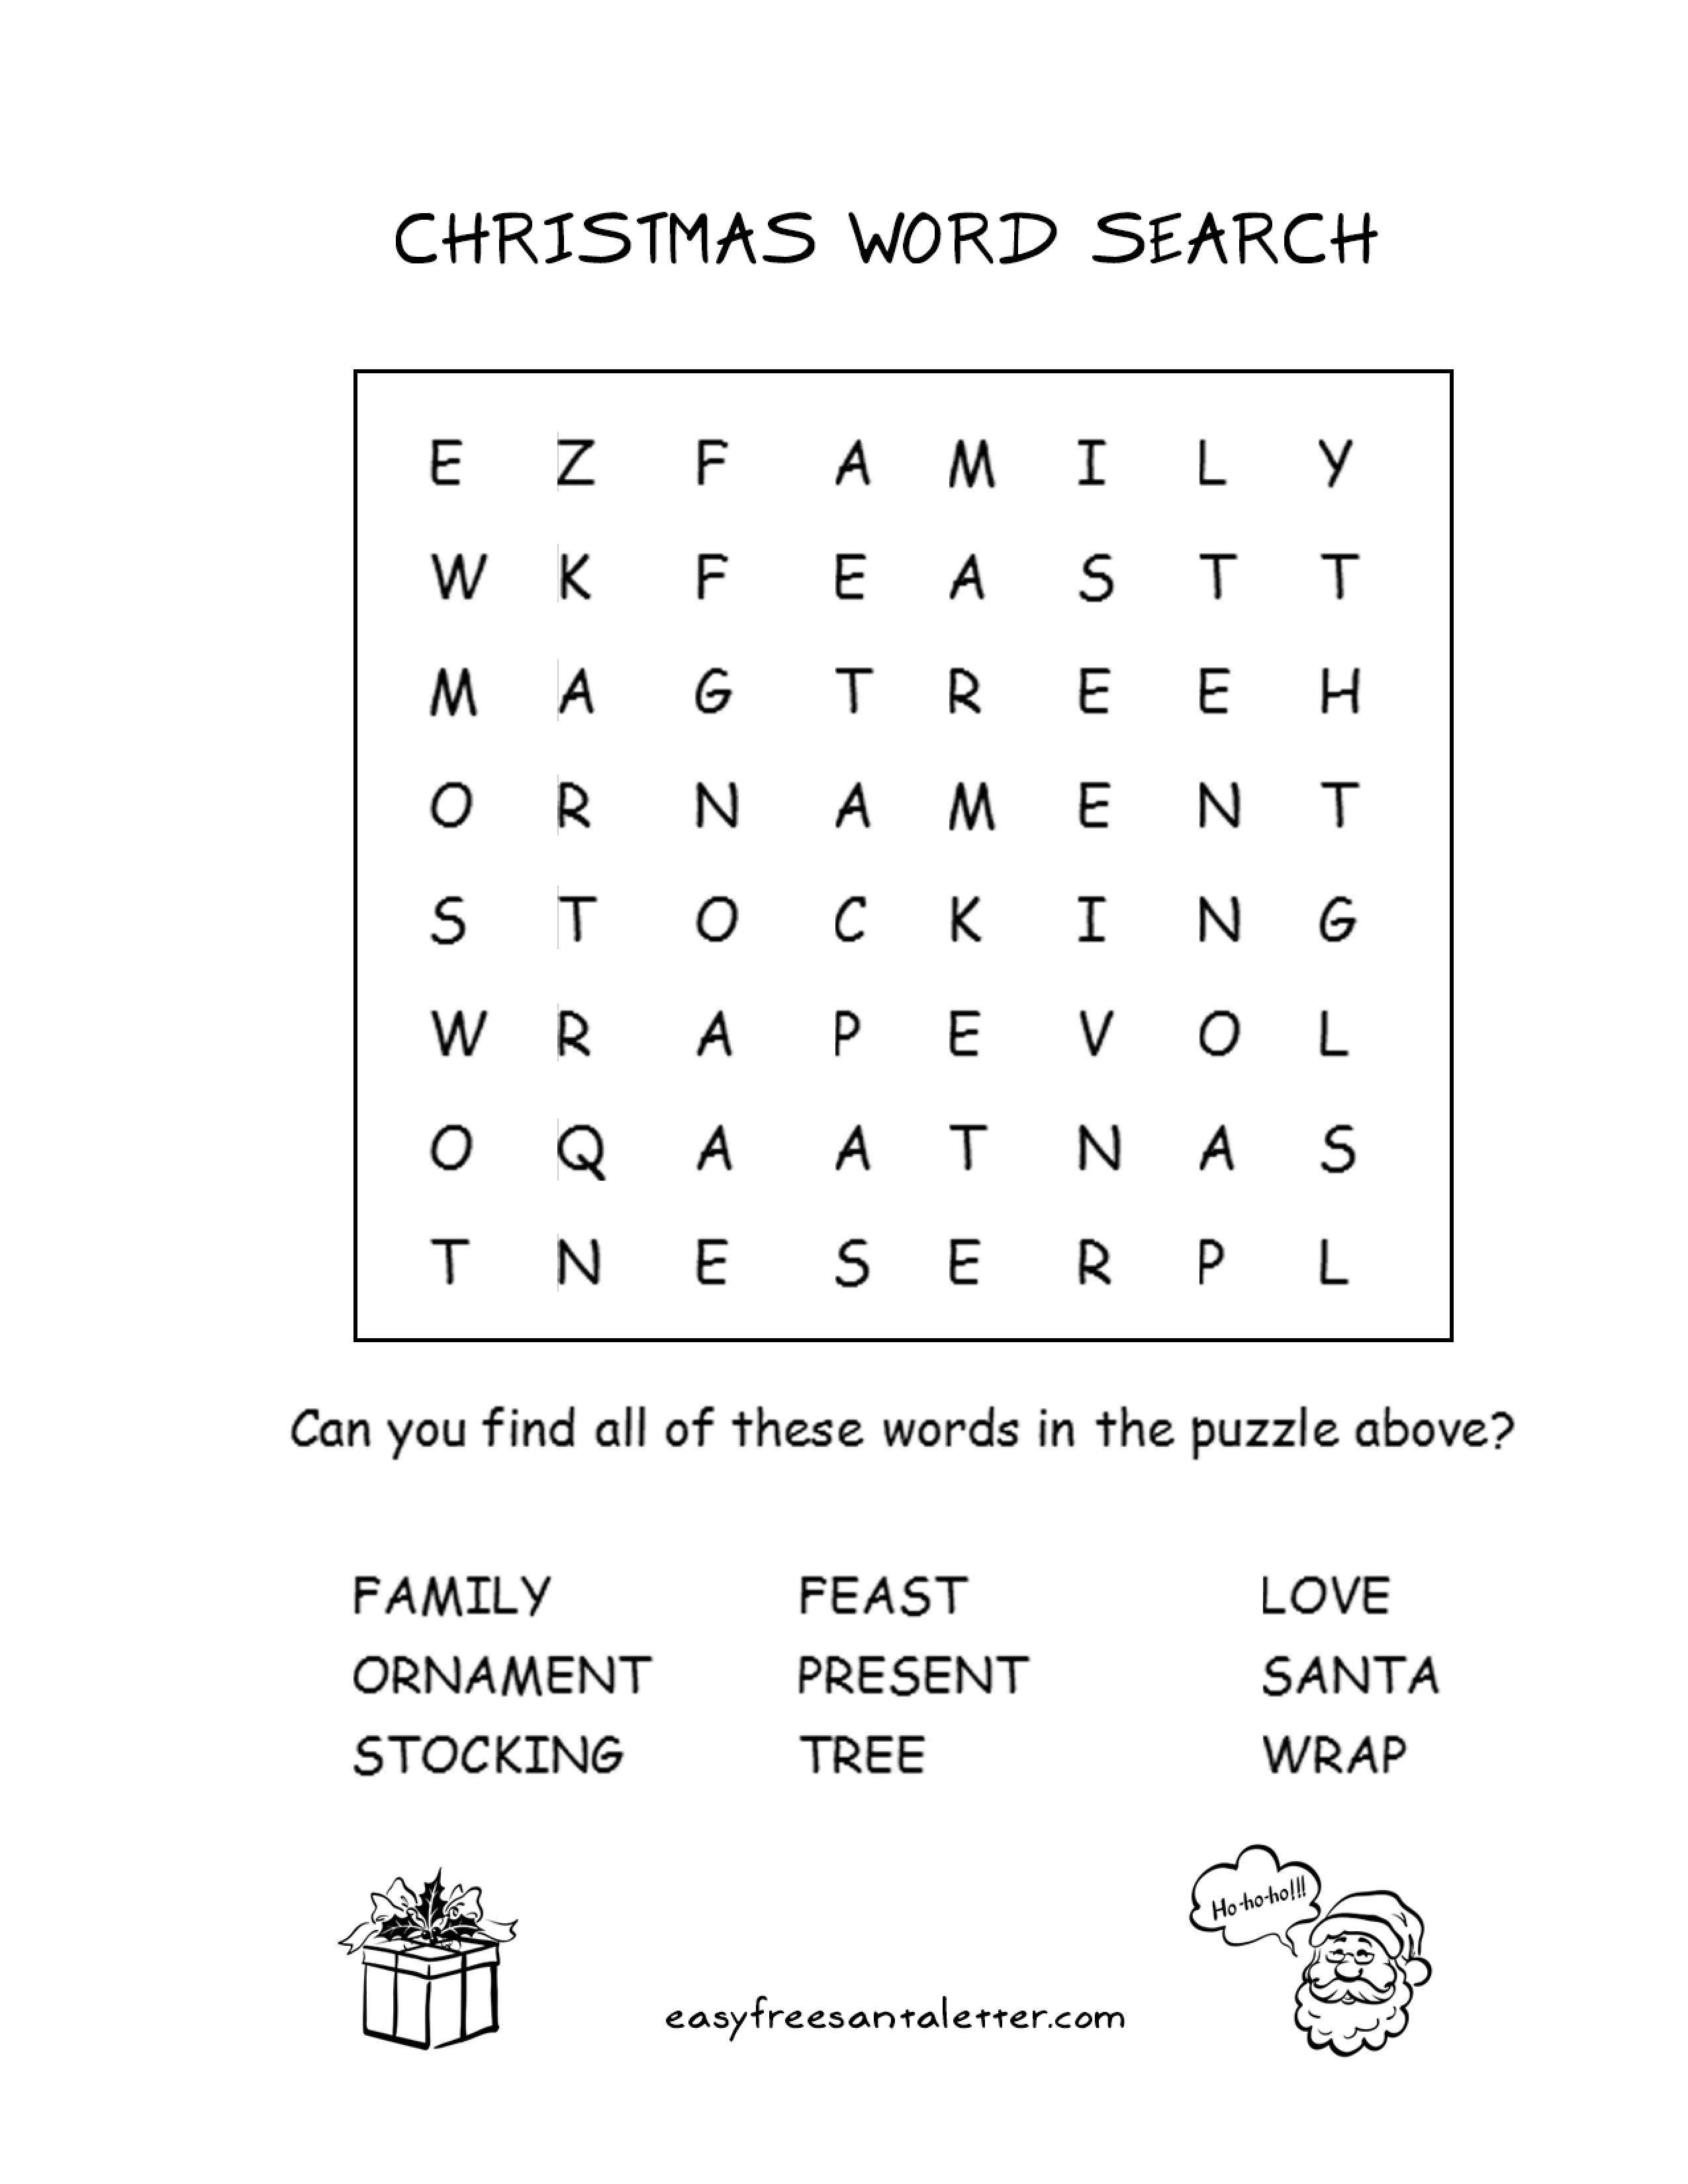 Free Printable Christmas Word Search! | Letters From Santa Christmas - Free Printable Christmas Puzzle Games